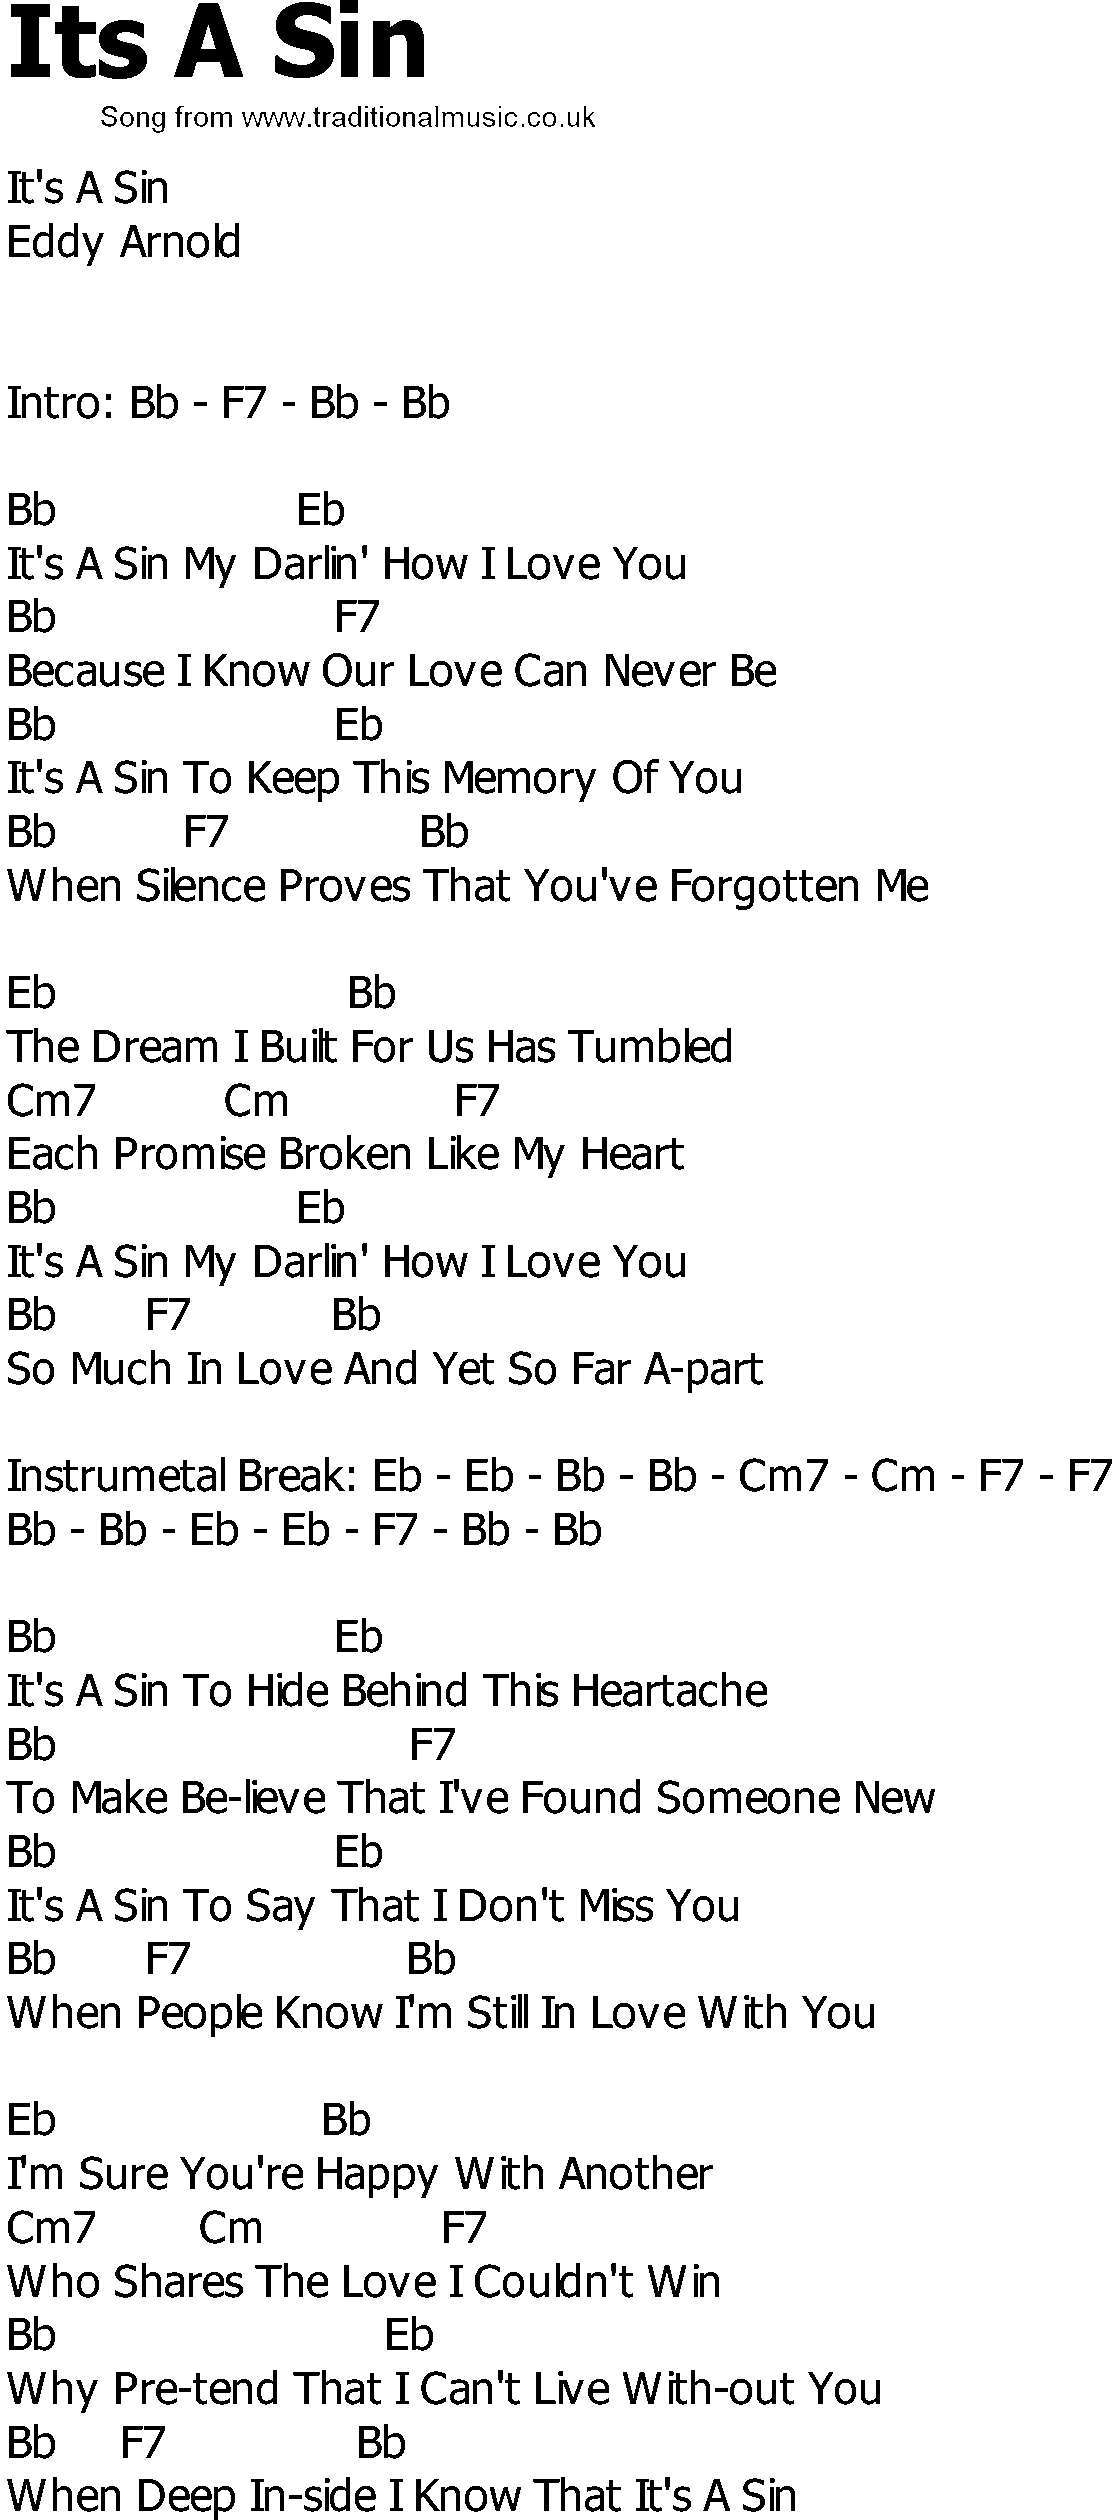 Old Country song lyrics with chords - Its A Sin